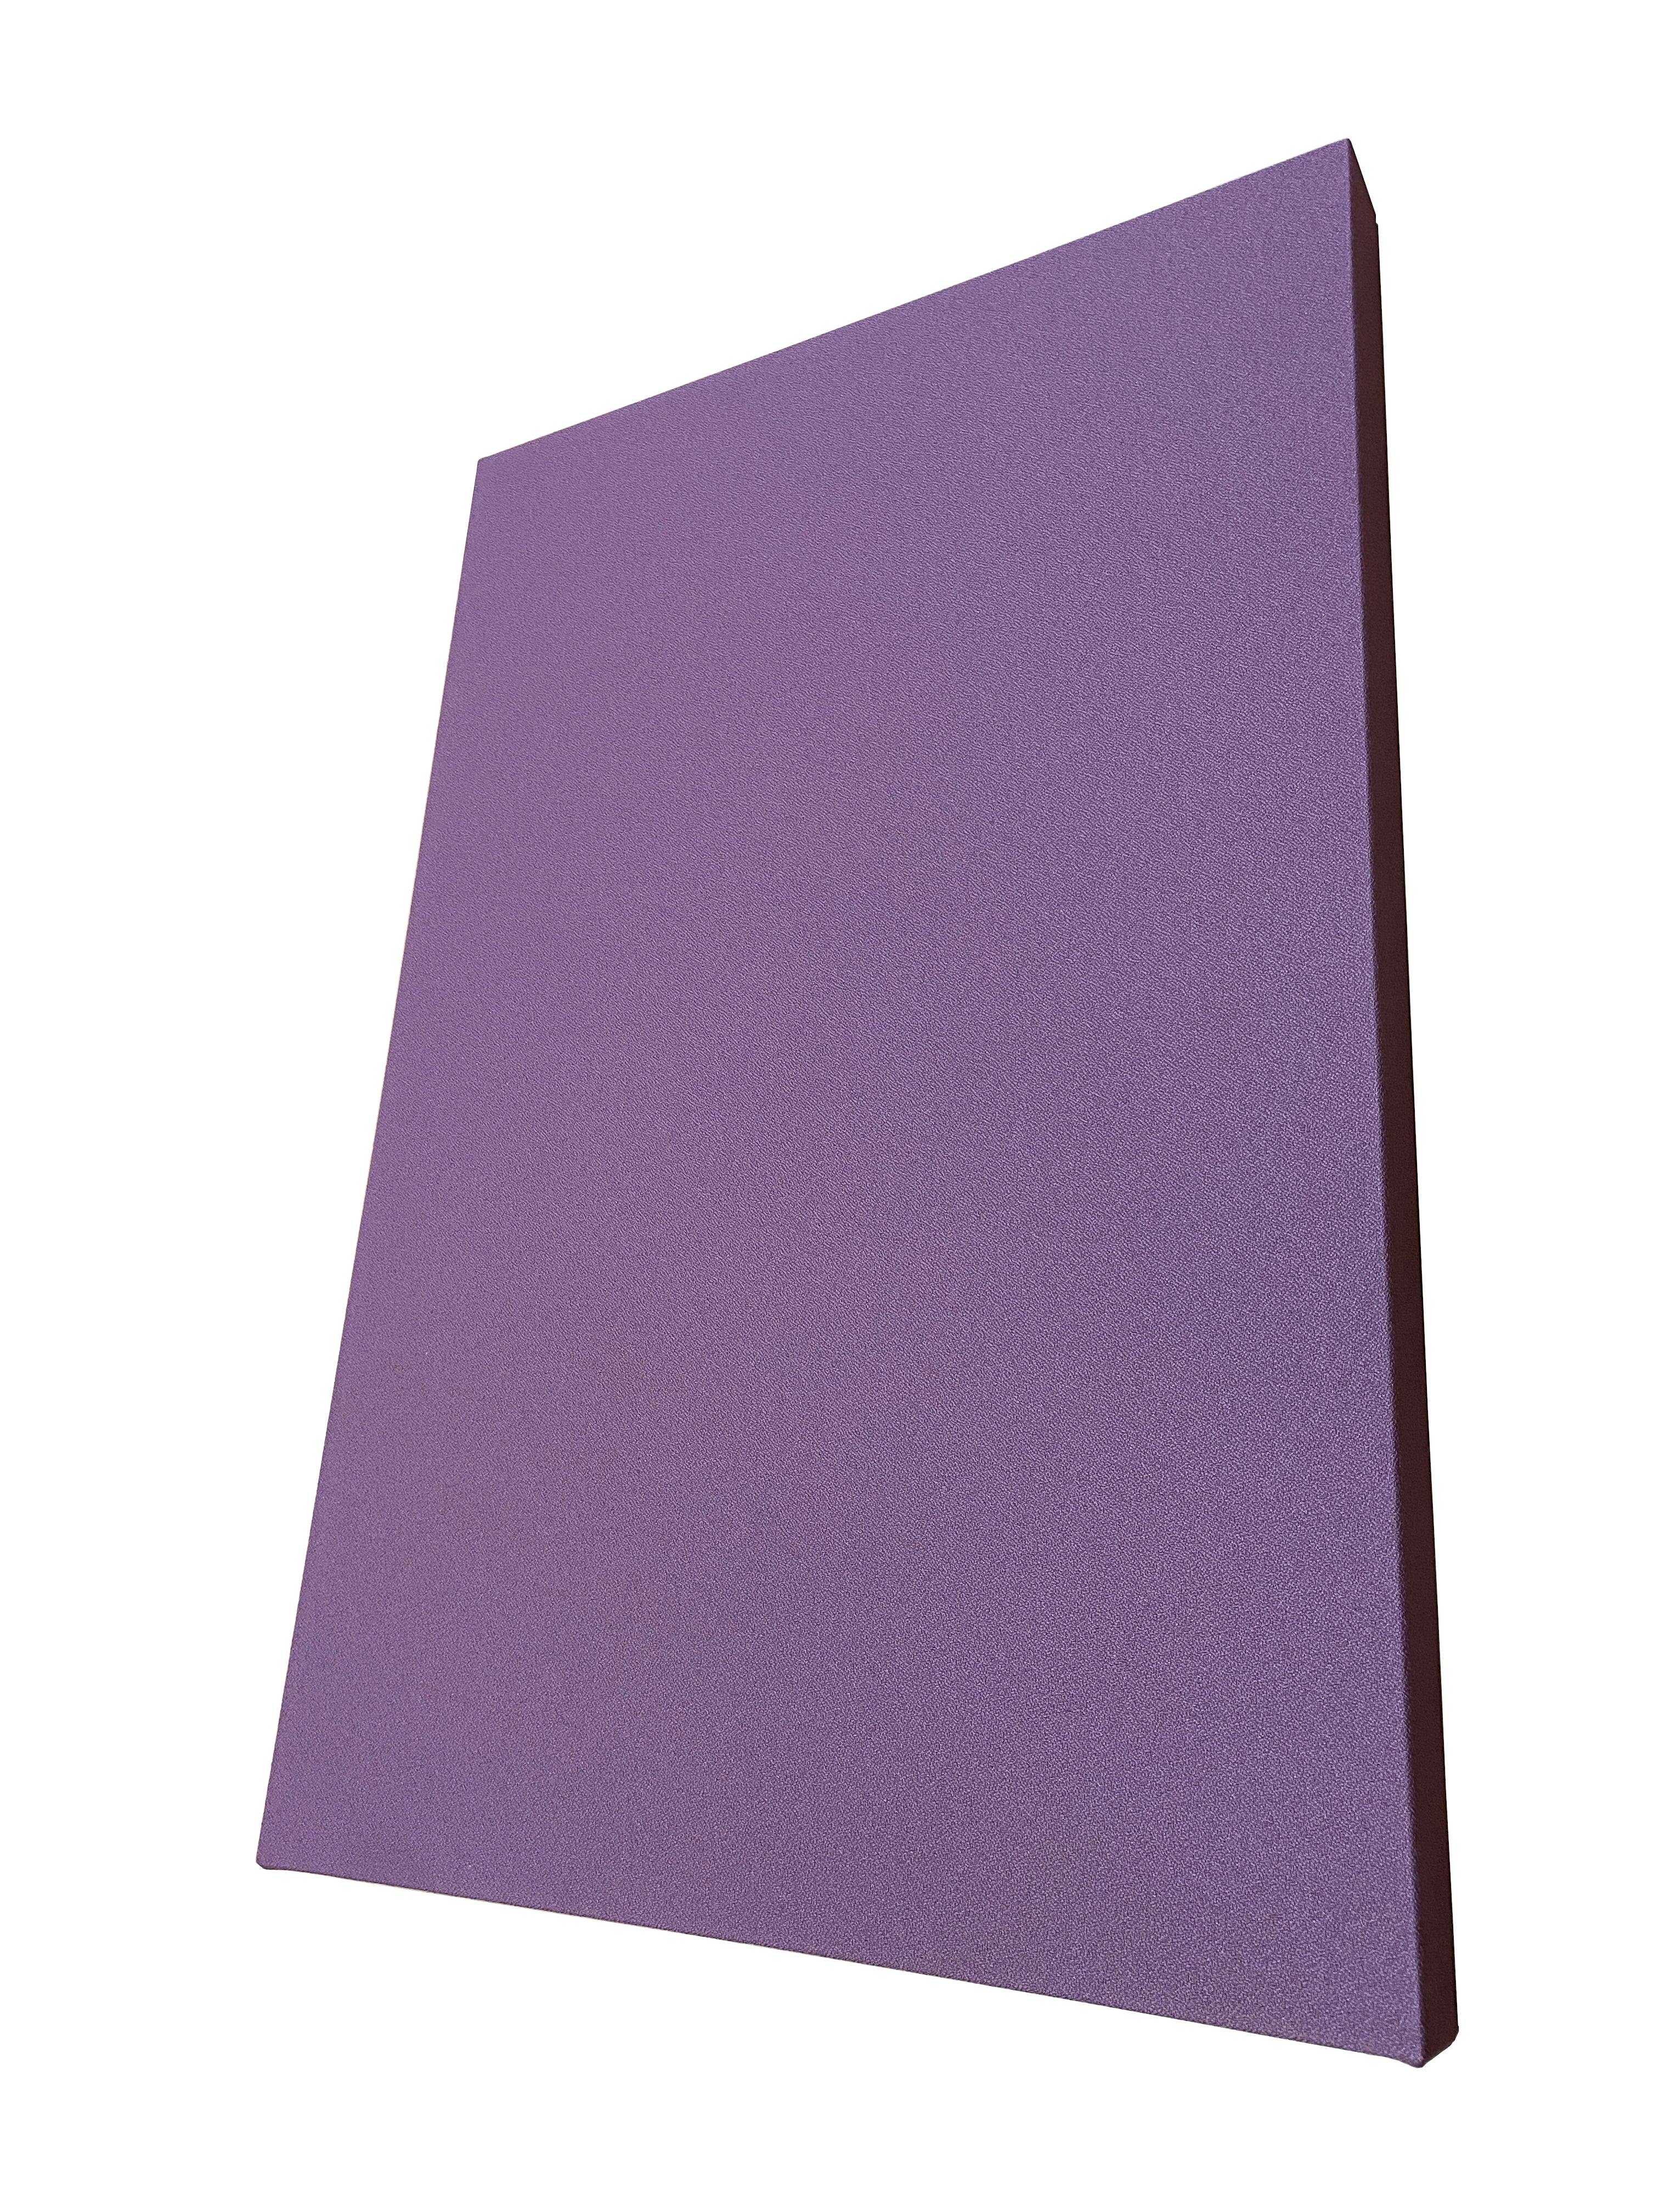 2" SoundControl Wall Mounted Acoustic Panel 2ft by 3ft